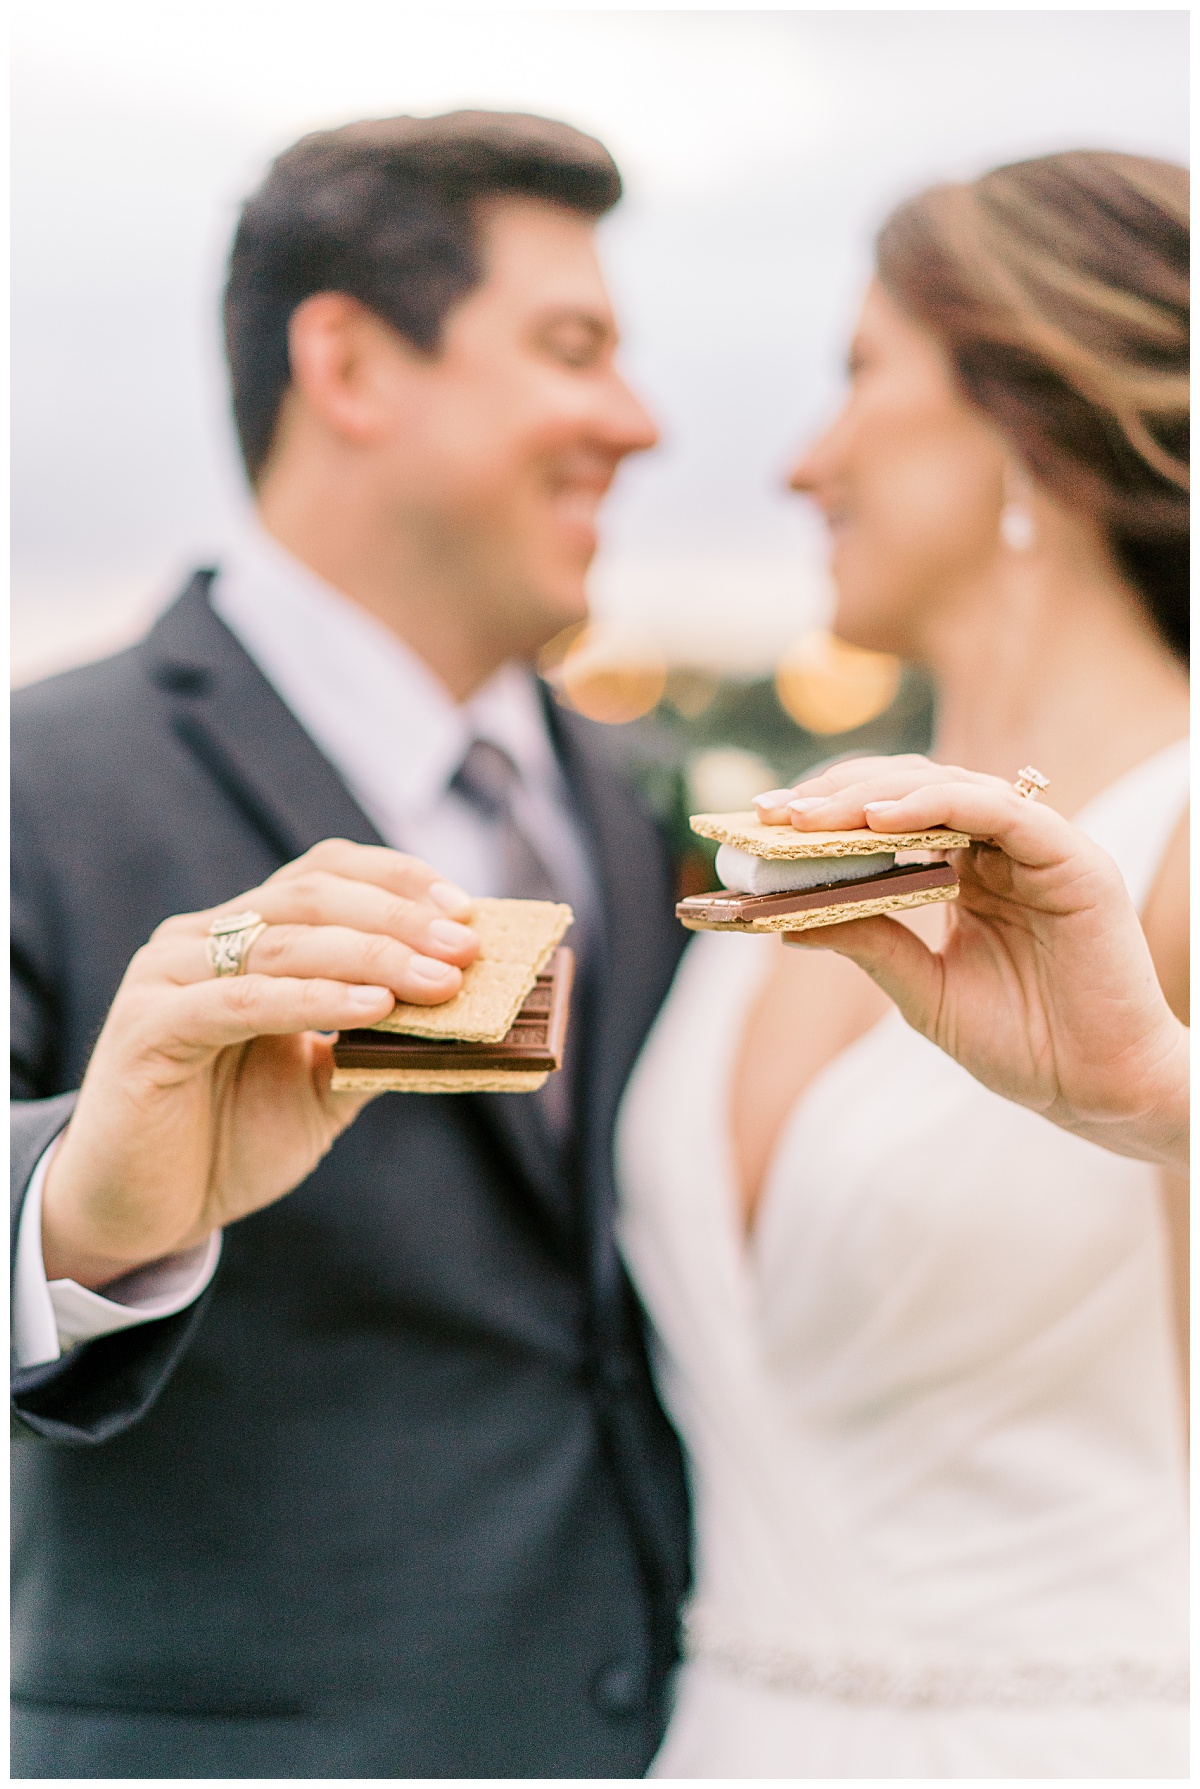 Gimme S'more Love at Wild and Lush style shoot | Photography by Alicia Yarrish Photography  